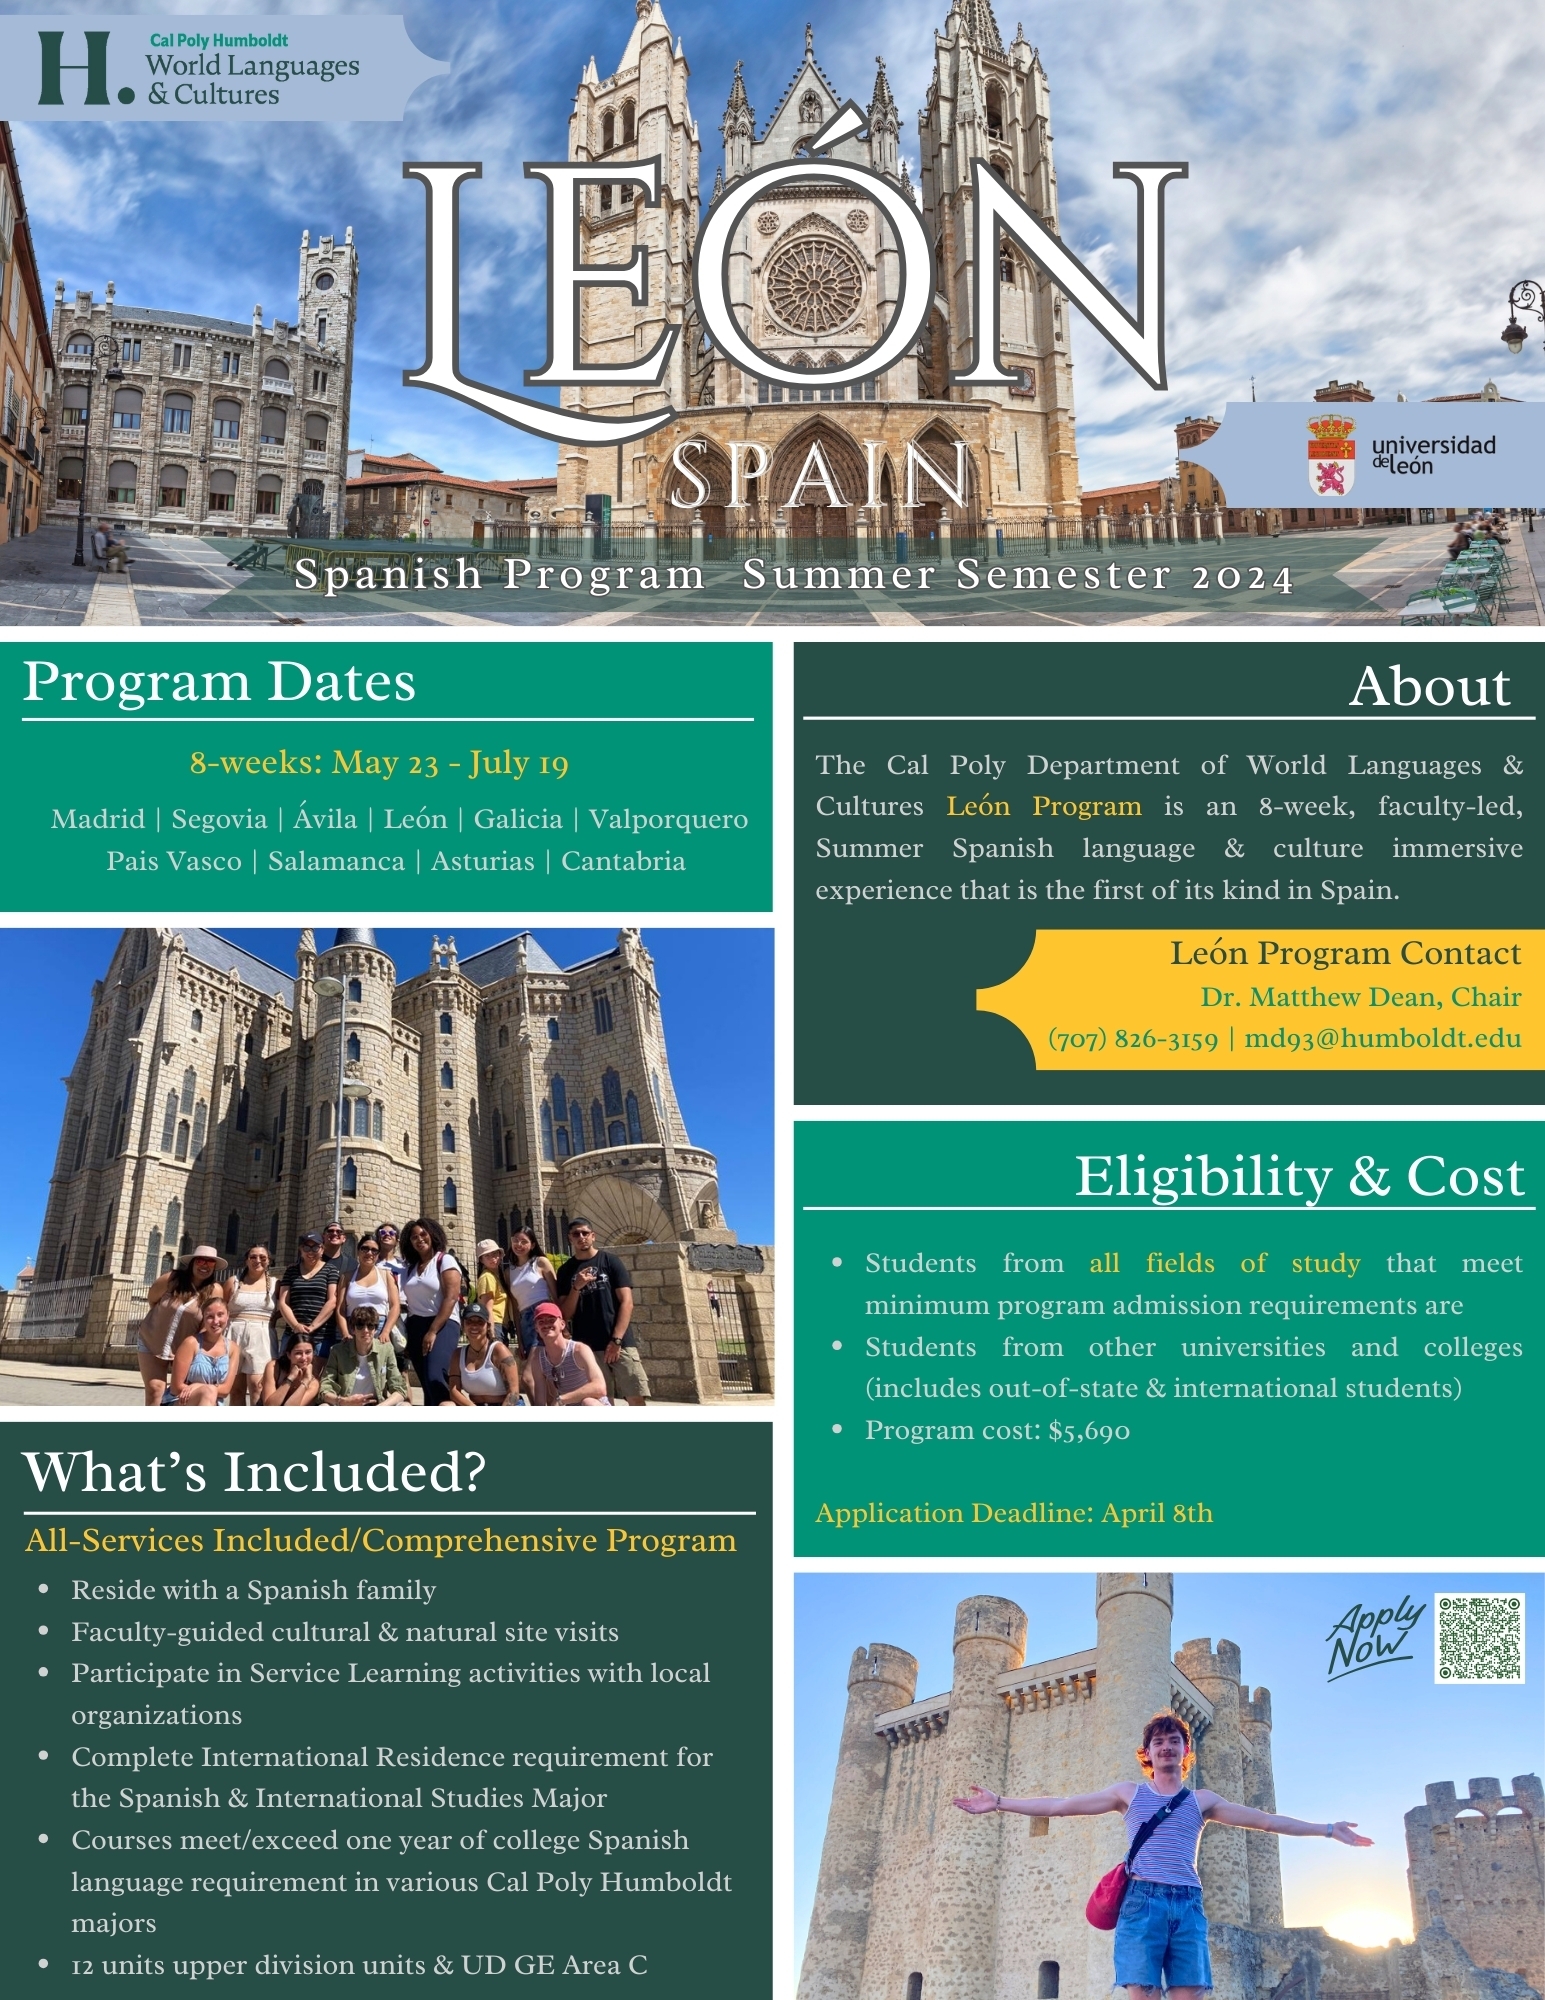 Leon Spain Study Abroad Program Dates May 23 through July 19 Students of all fields of study that meet minimum qualifications and requirements may apply Cost of program $5,690 USD. All Services included: reside with spanish family, faculty guided cultural and natural site visits, service learning activities. Application deadline April 8th